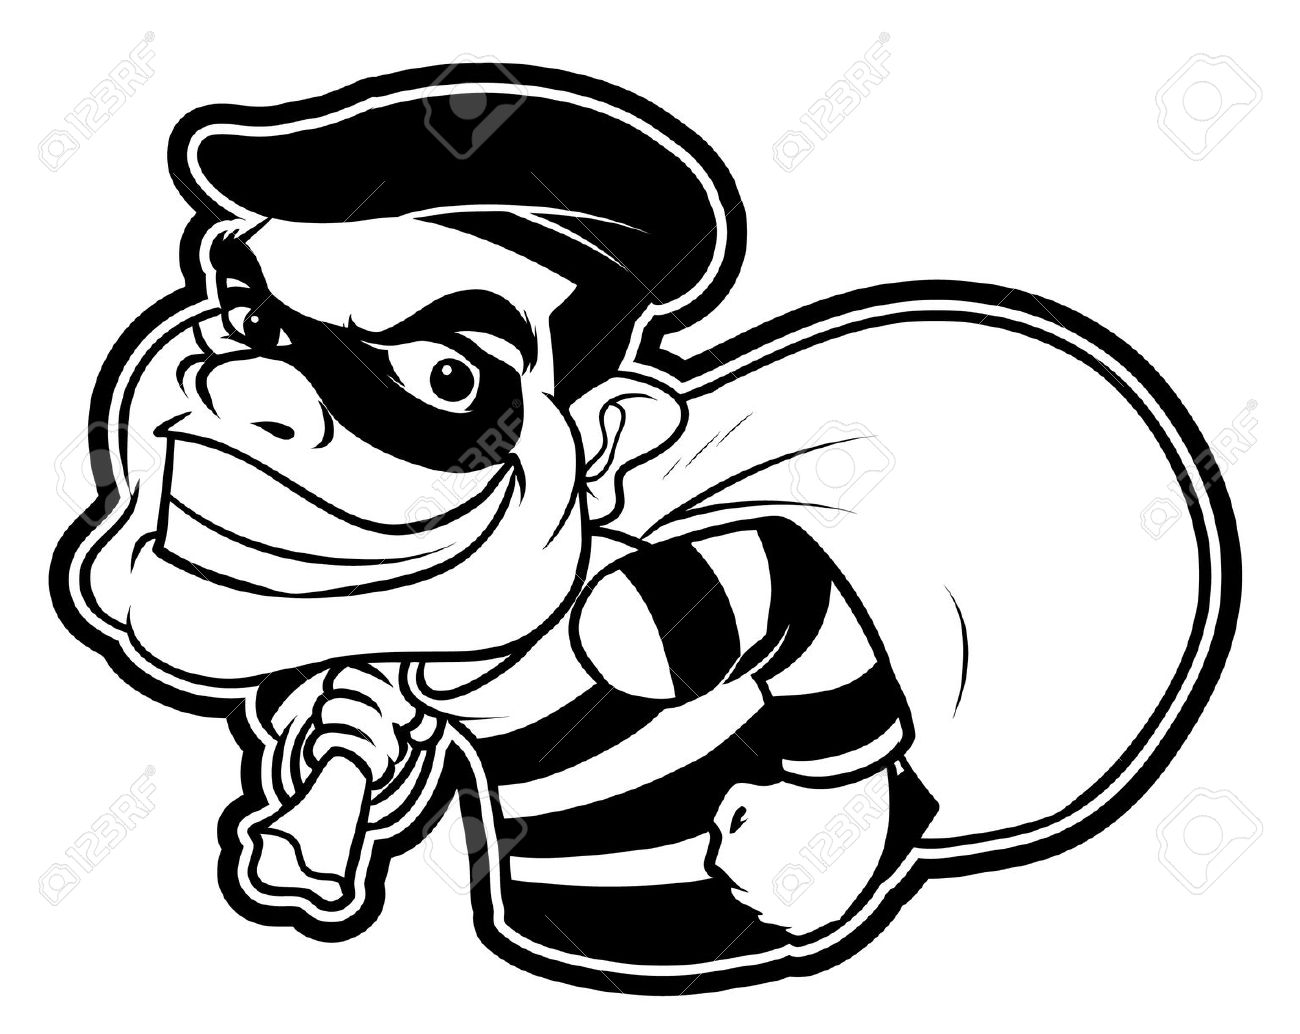 Robber thief clip art free clipart images